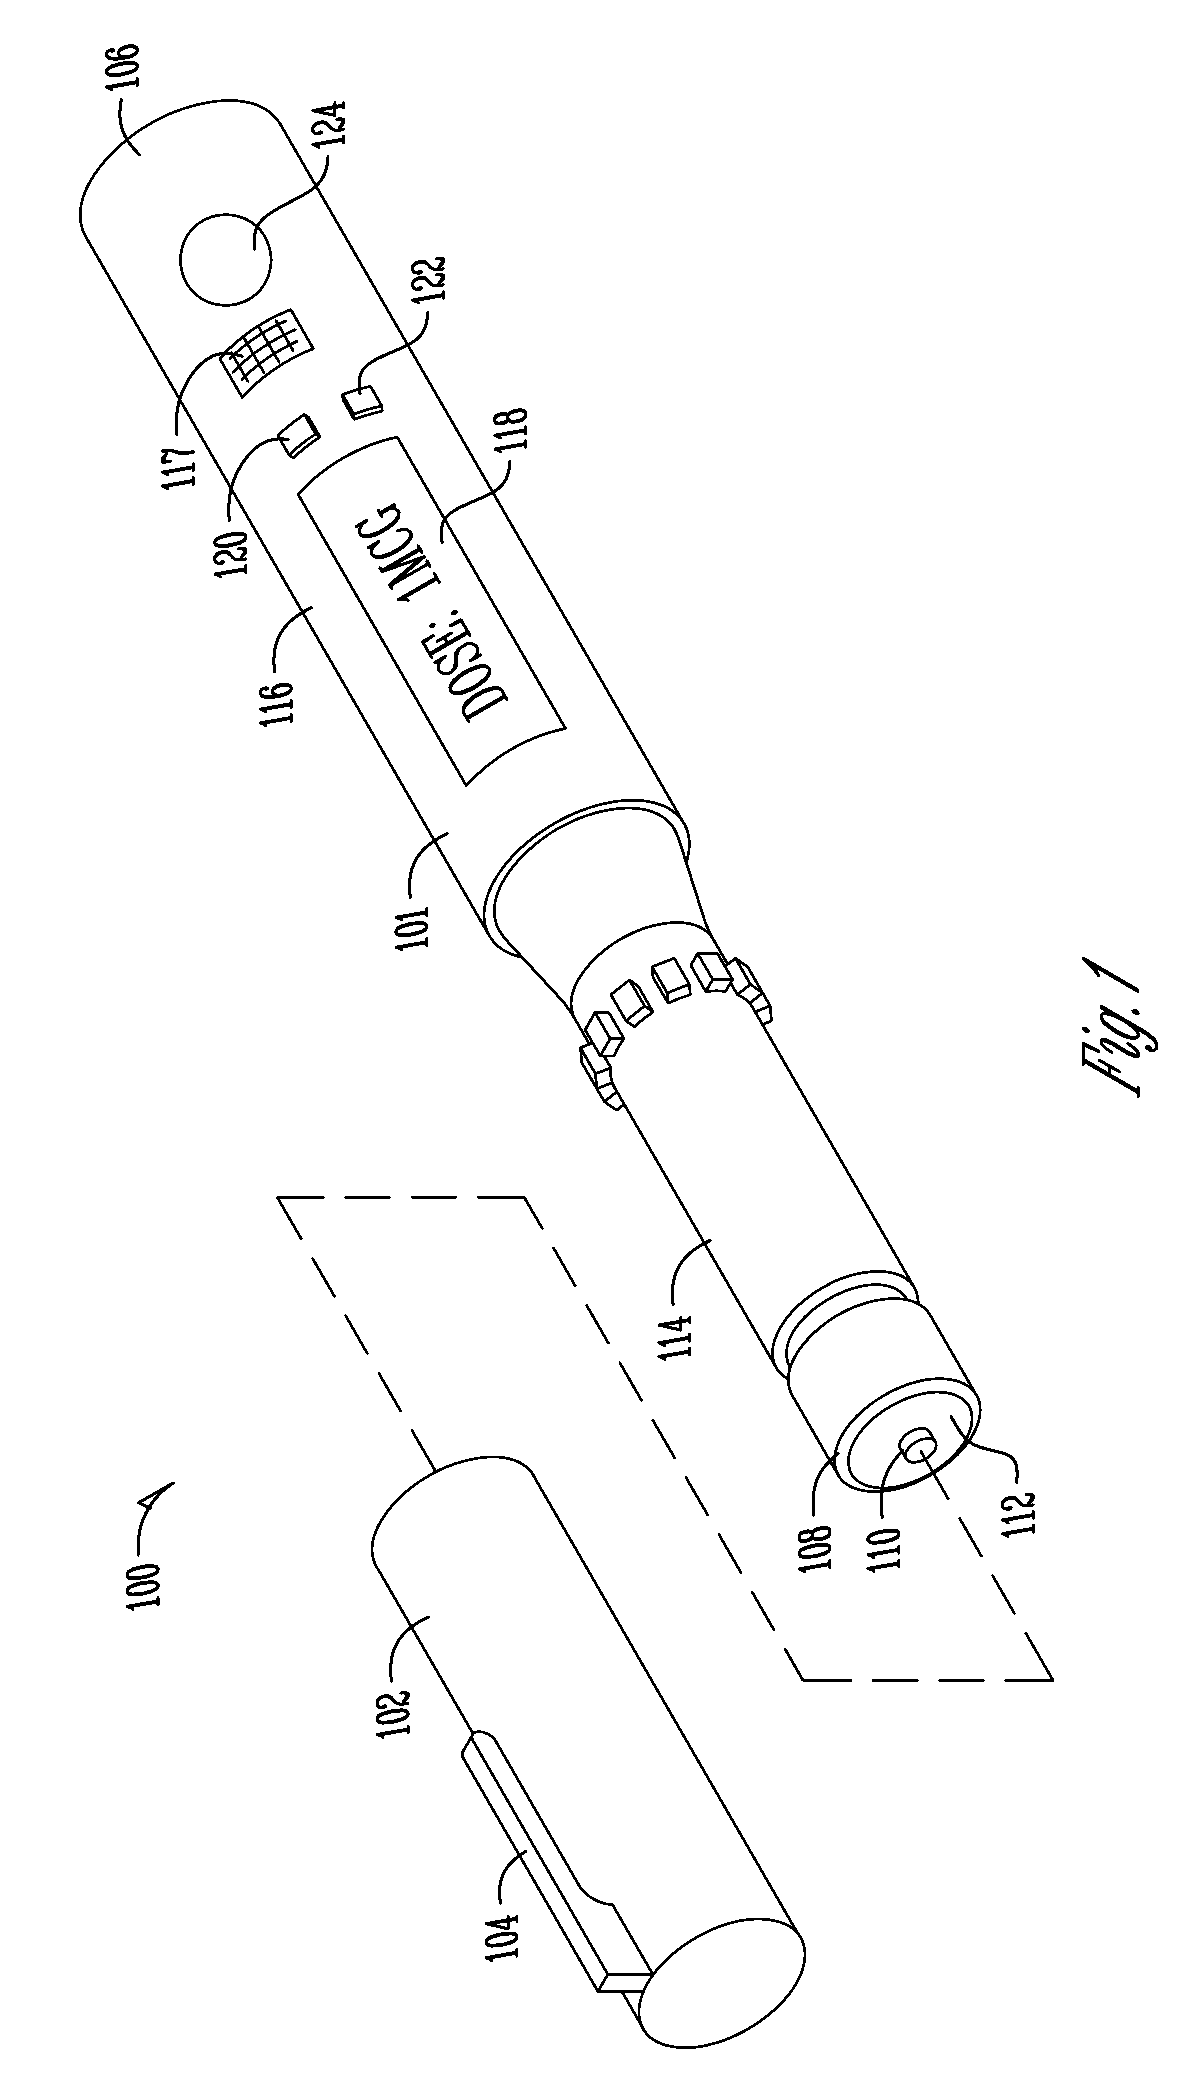 Self-contained medication injection system and method